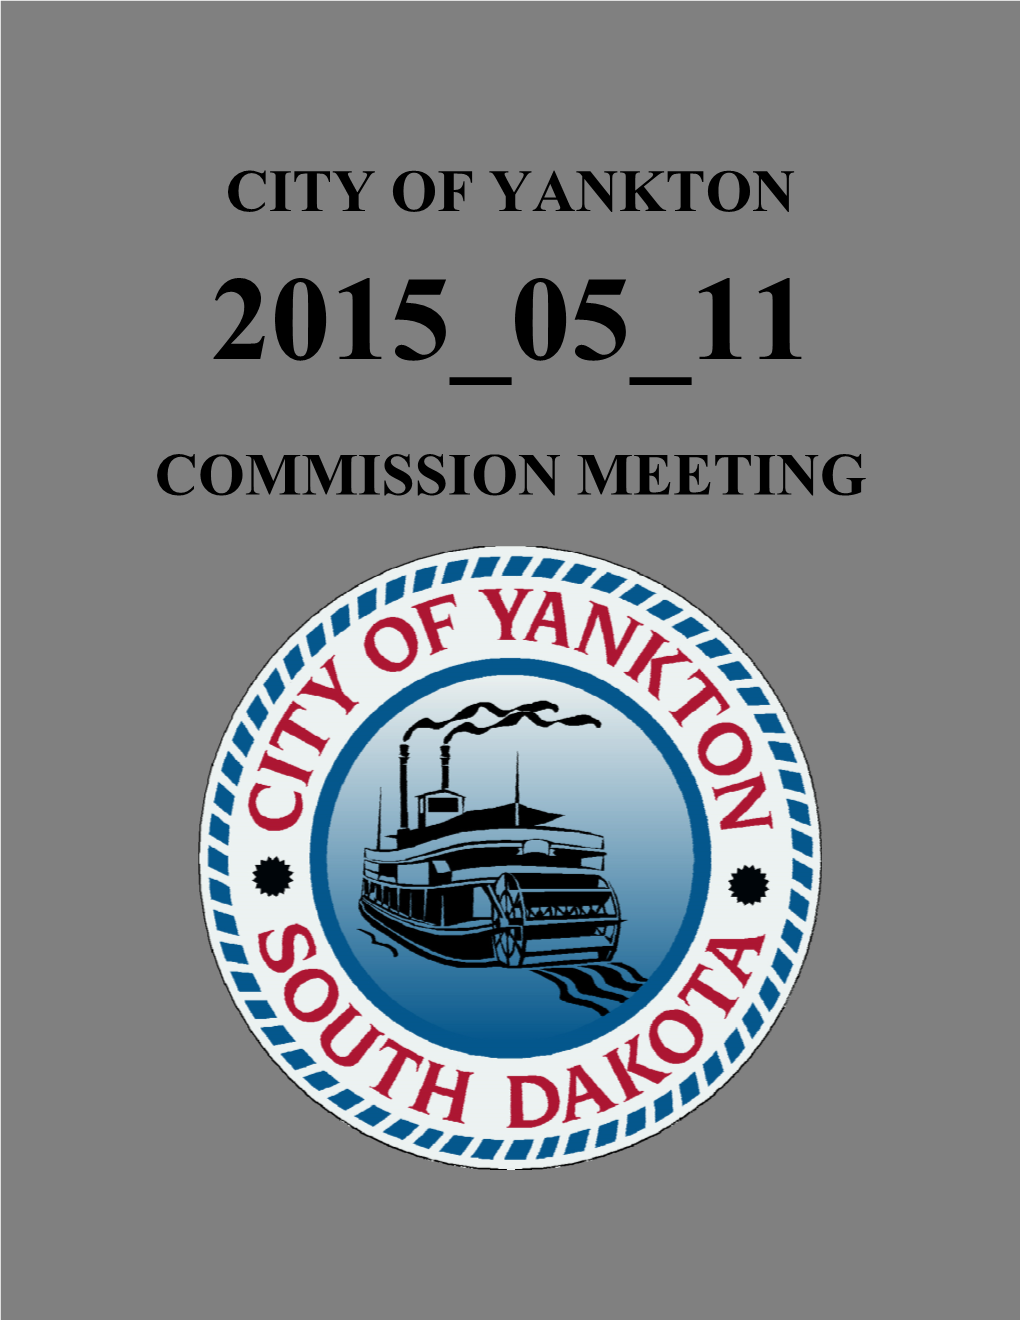 City of Yankton Commission Meeting to Be Held at the RTEC